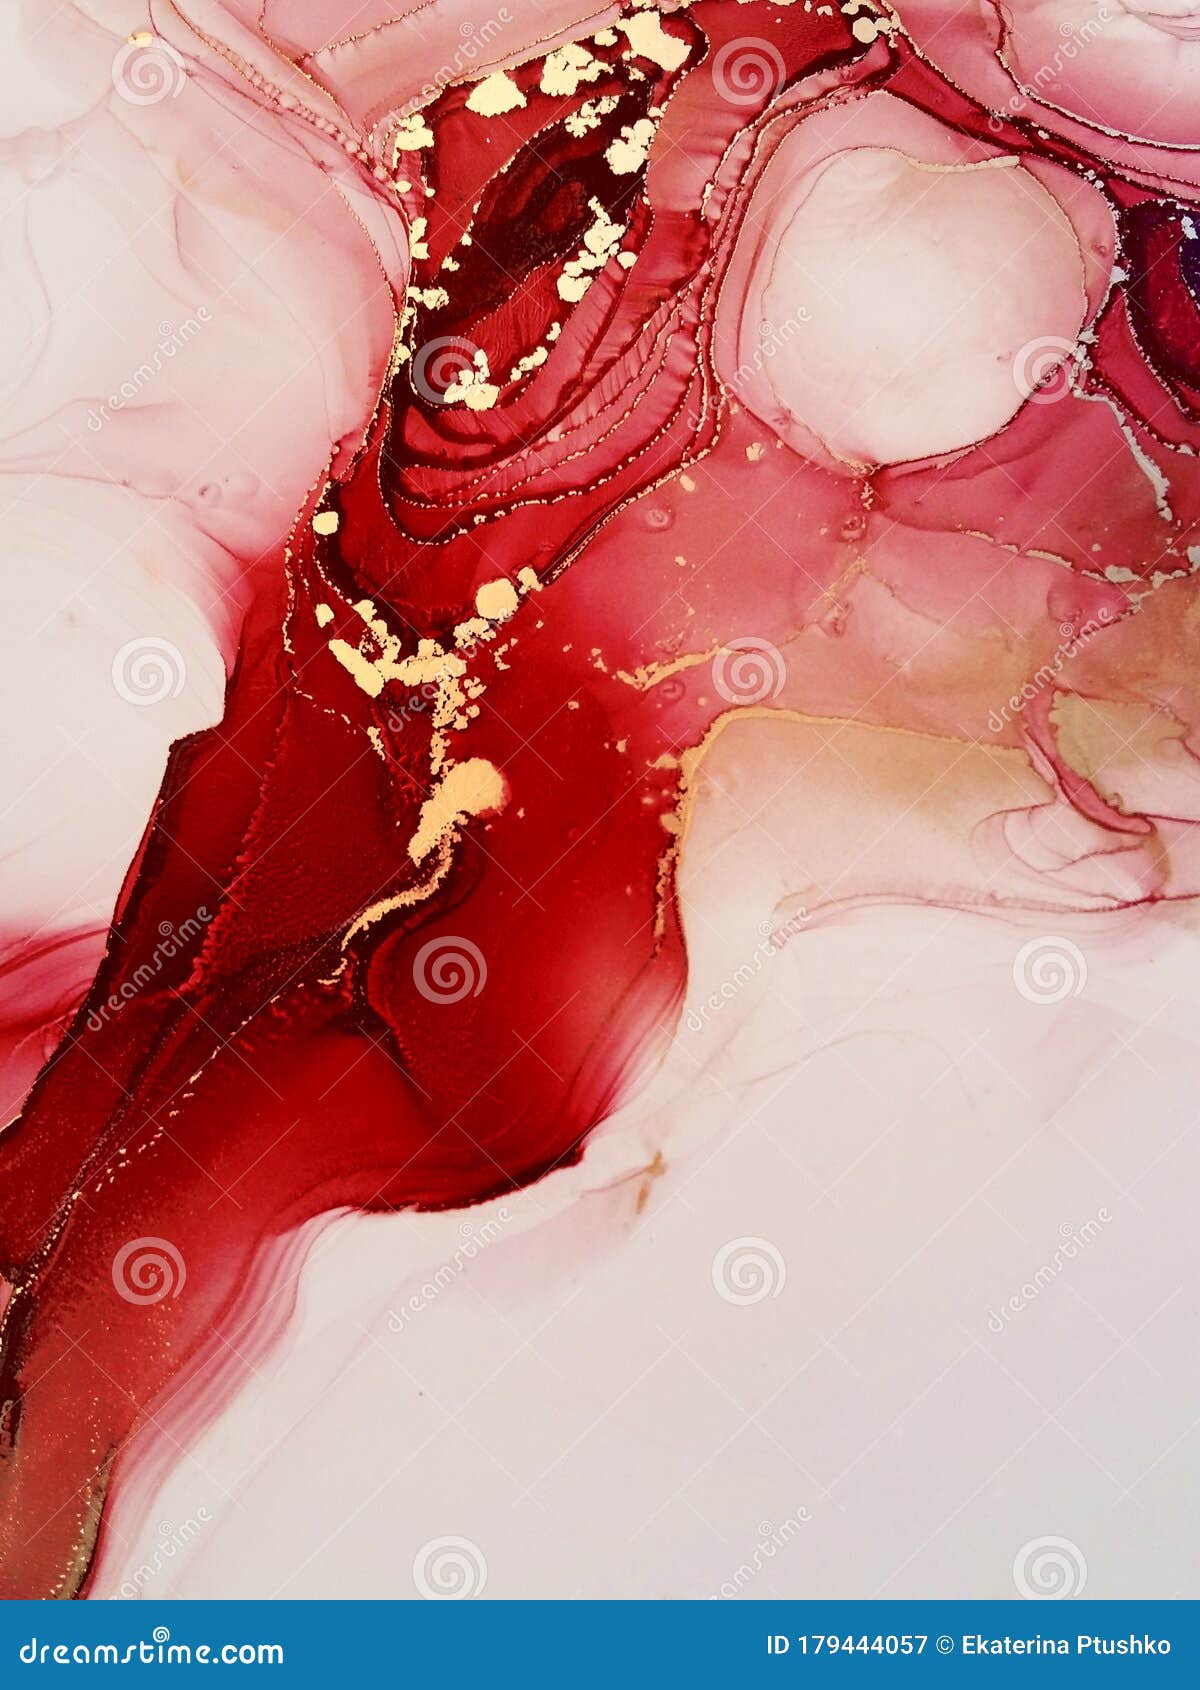 passionate red abstract fluid art painting. alcohol inks with gold.